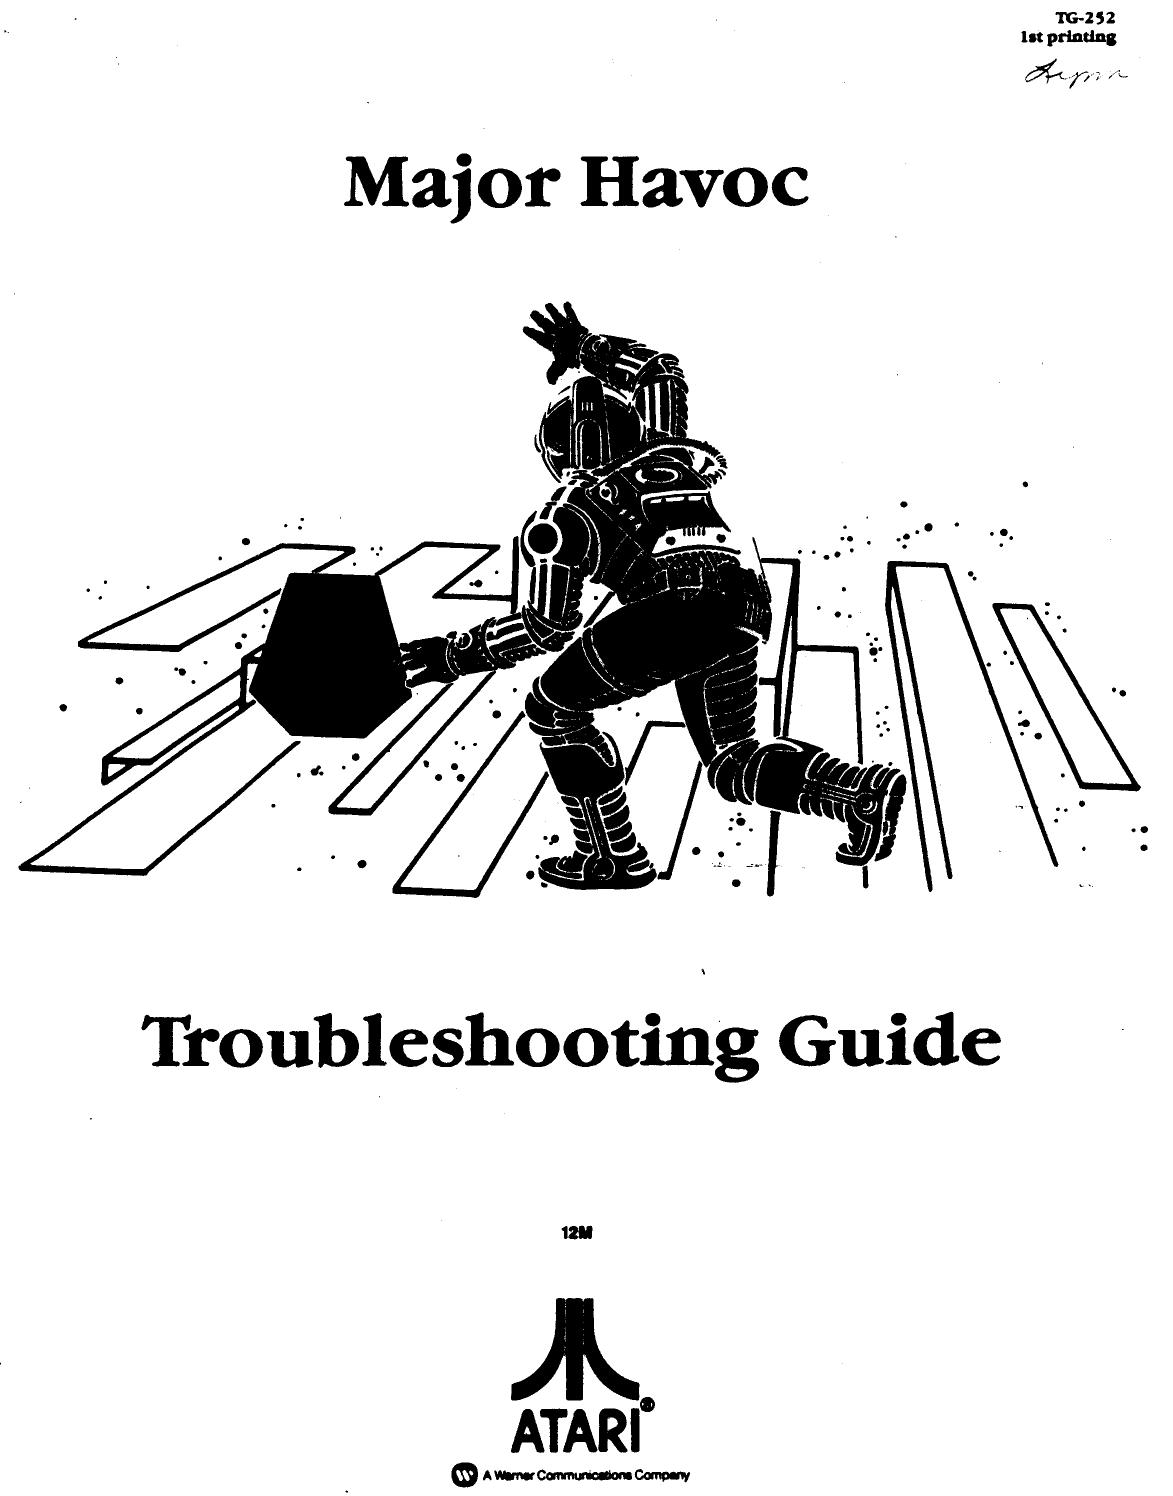 Major Havoc TG-252 Trouble Shooting Guide